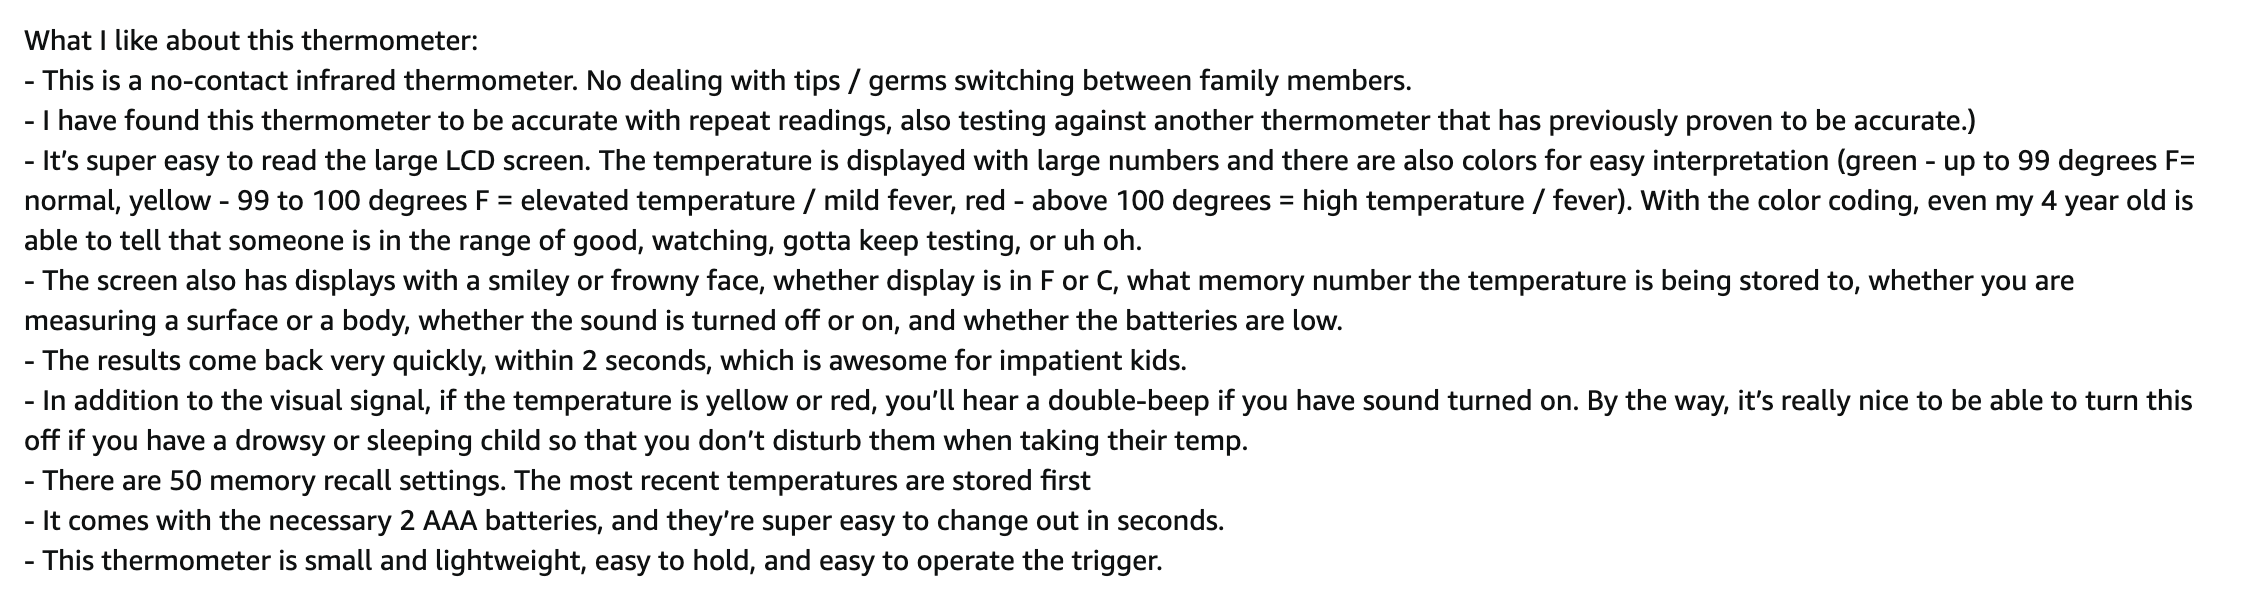 amazon review thermometer